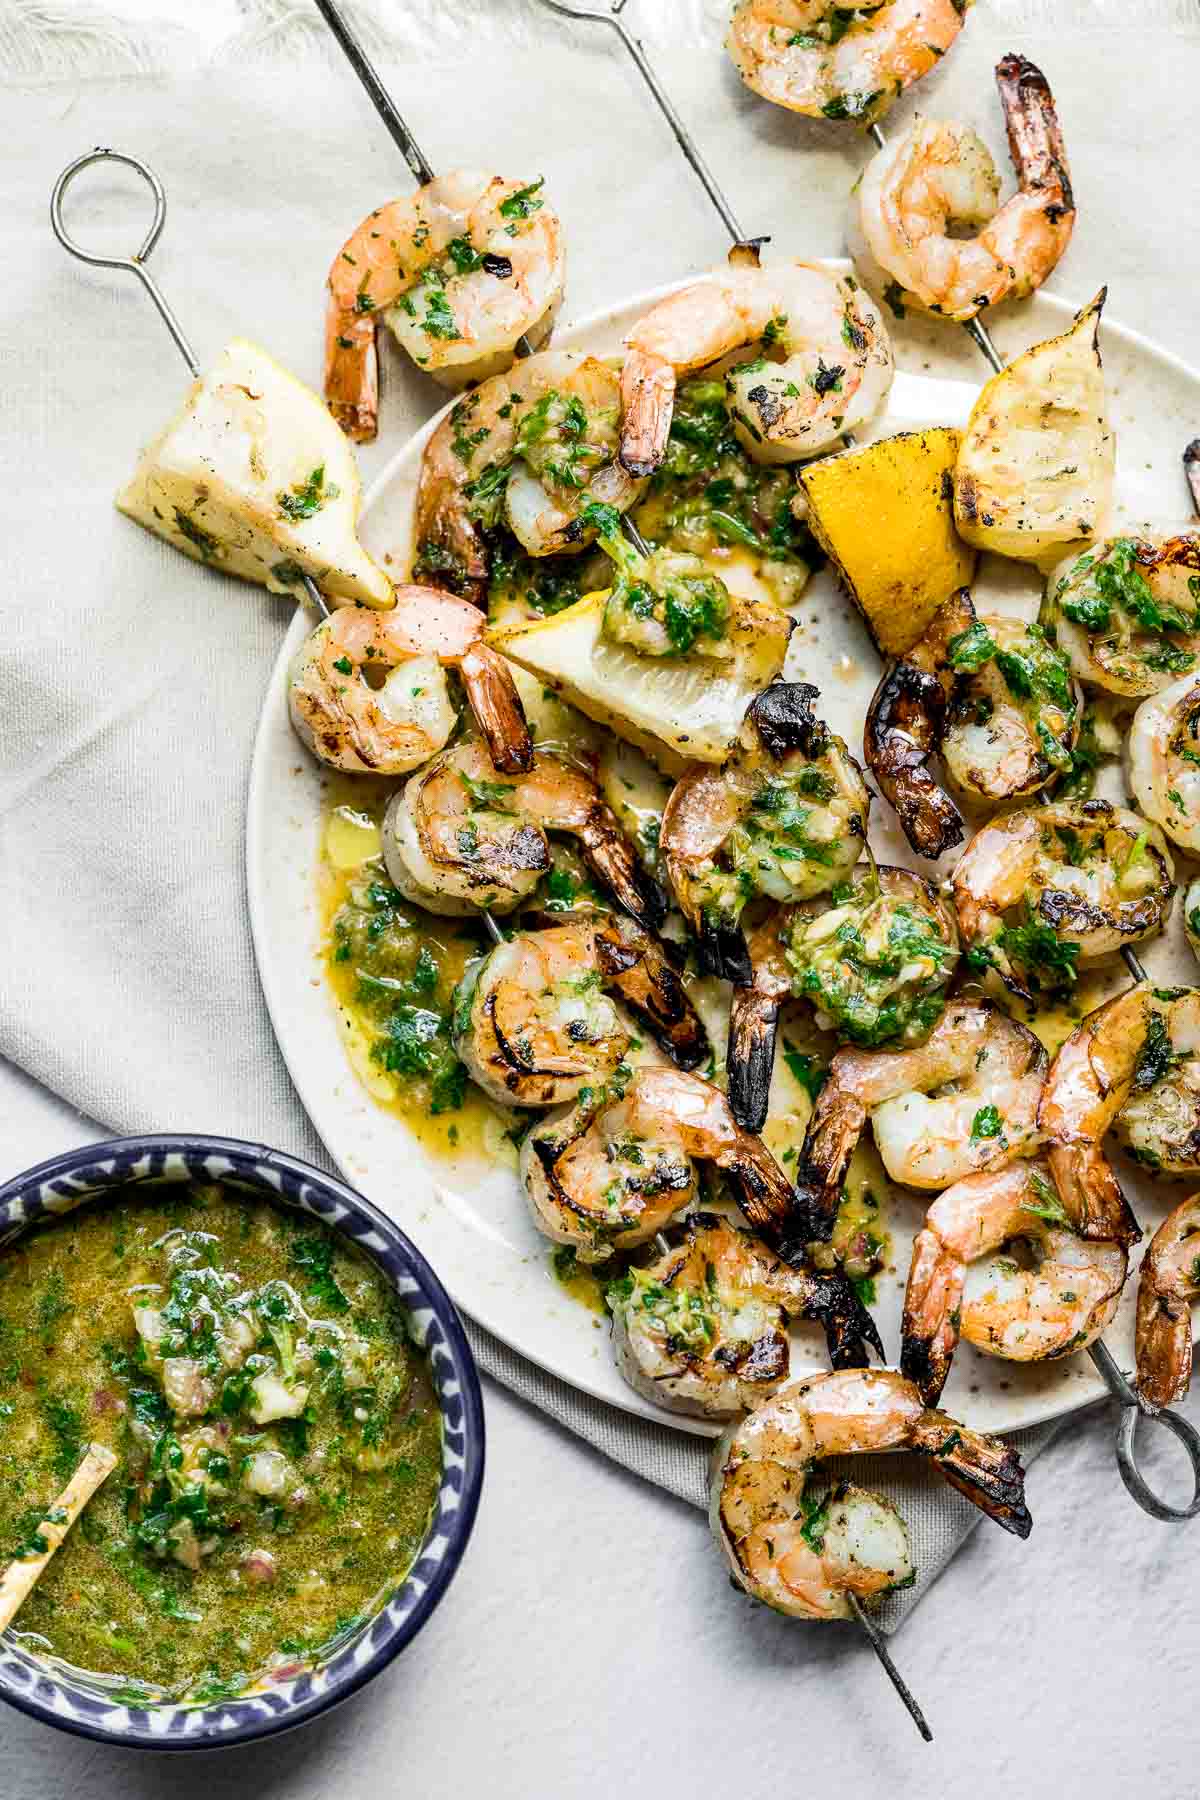 platter of grilled shrimp skewers with chimichurri sauce.